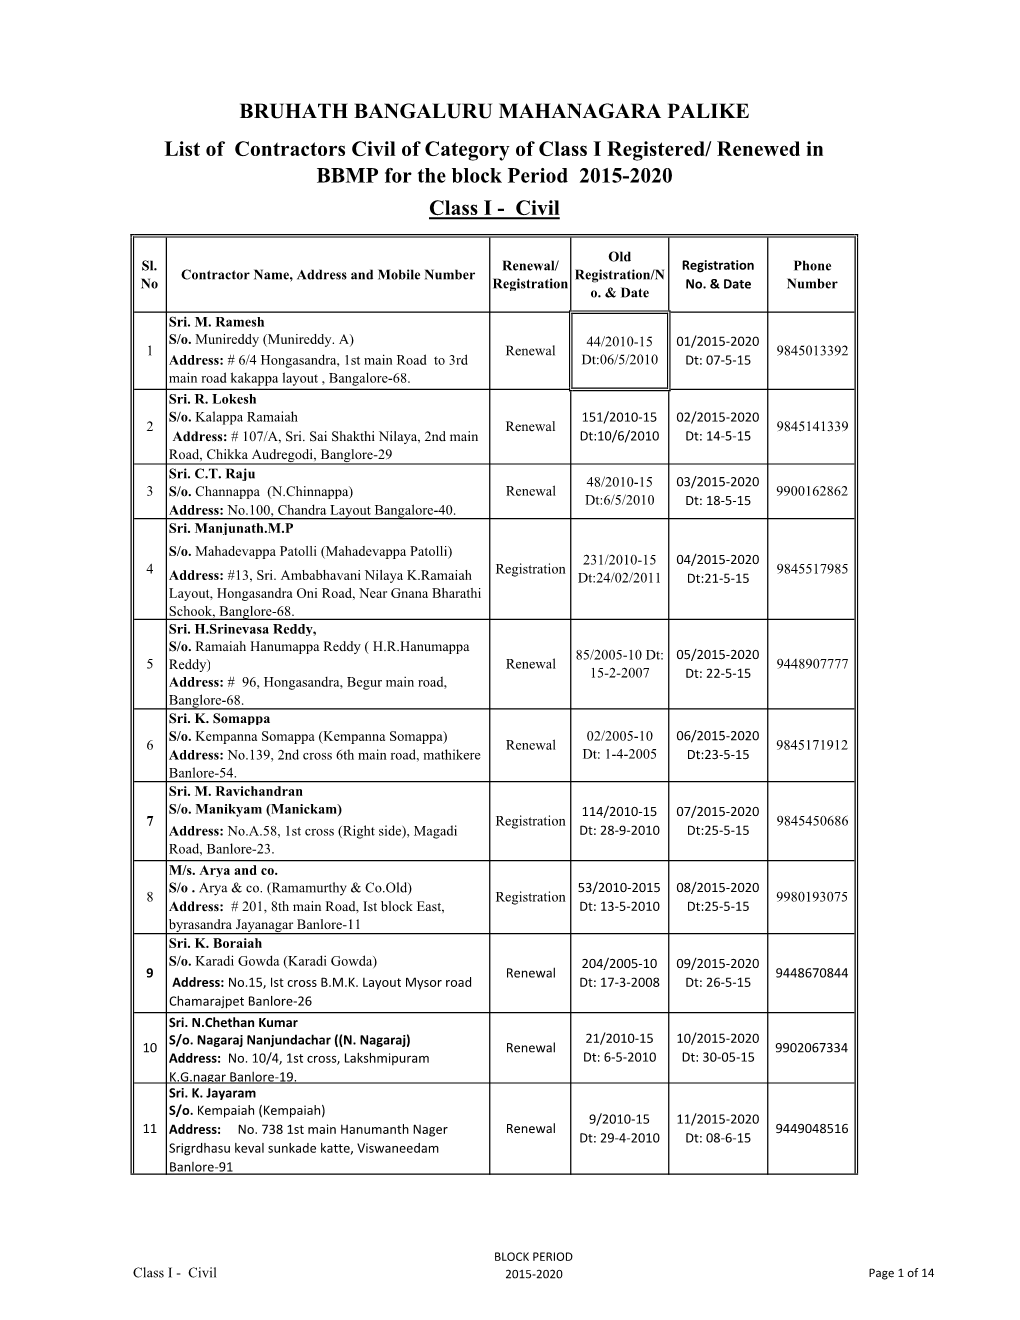 List of Contractors Civil of Category of Class I Registered/ Renewed in BBMP for the Block Period 2015-2020 Class I - Civil